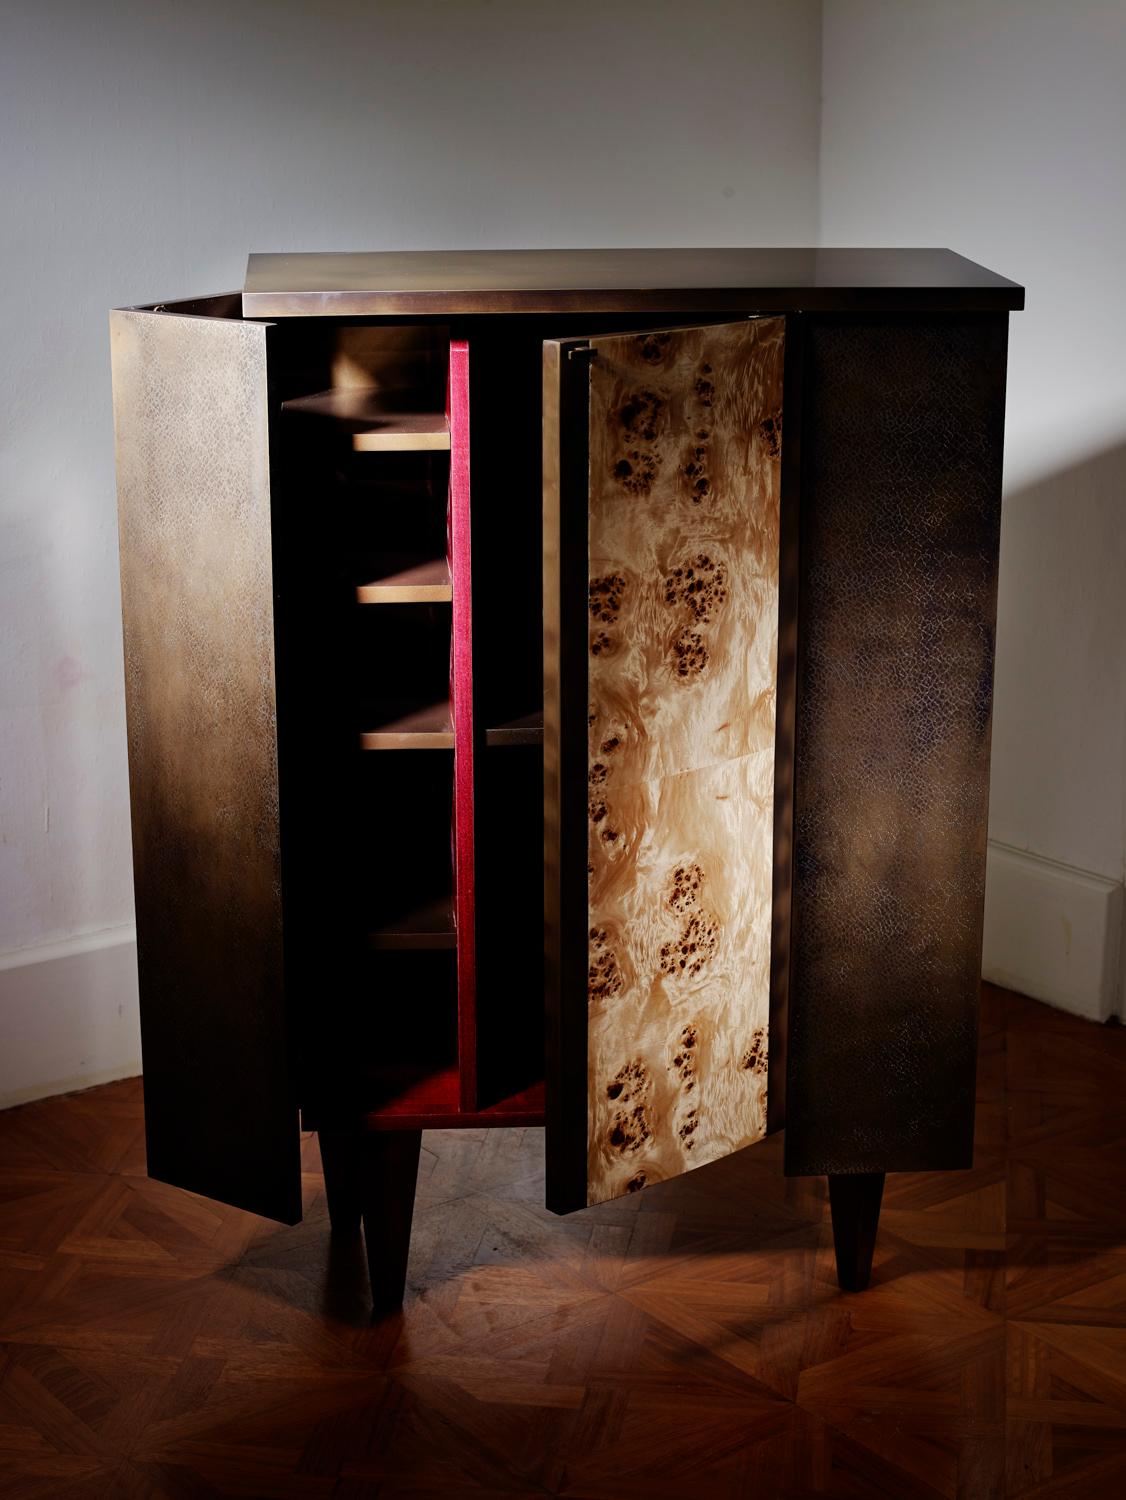 Burnished bronze over carved wood.
Finely chiselled door fronts covered with burnished bronze.
Central door in Poplar burl. Inside divided into shelves, in polished purpleheart wood.
Dimensions: H 120 x W 80 x D 36 cm. Edition of 8 (2